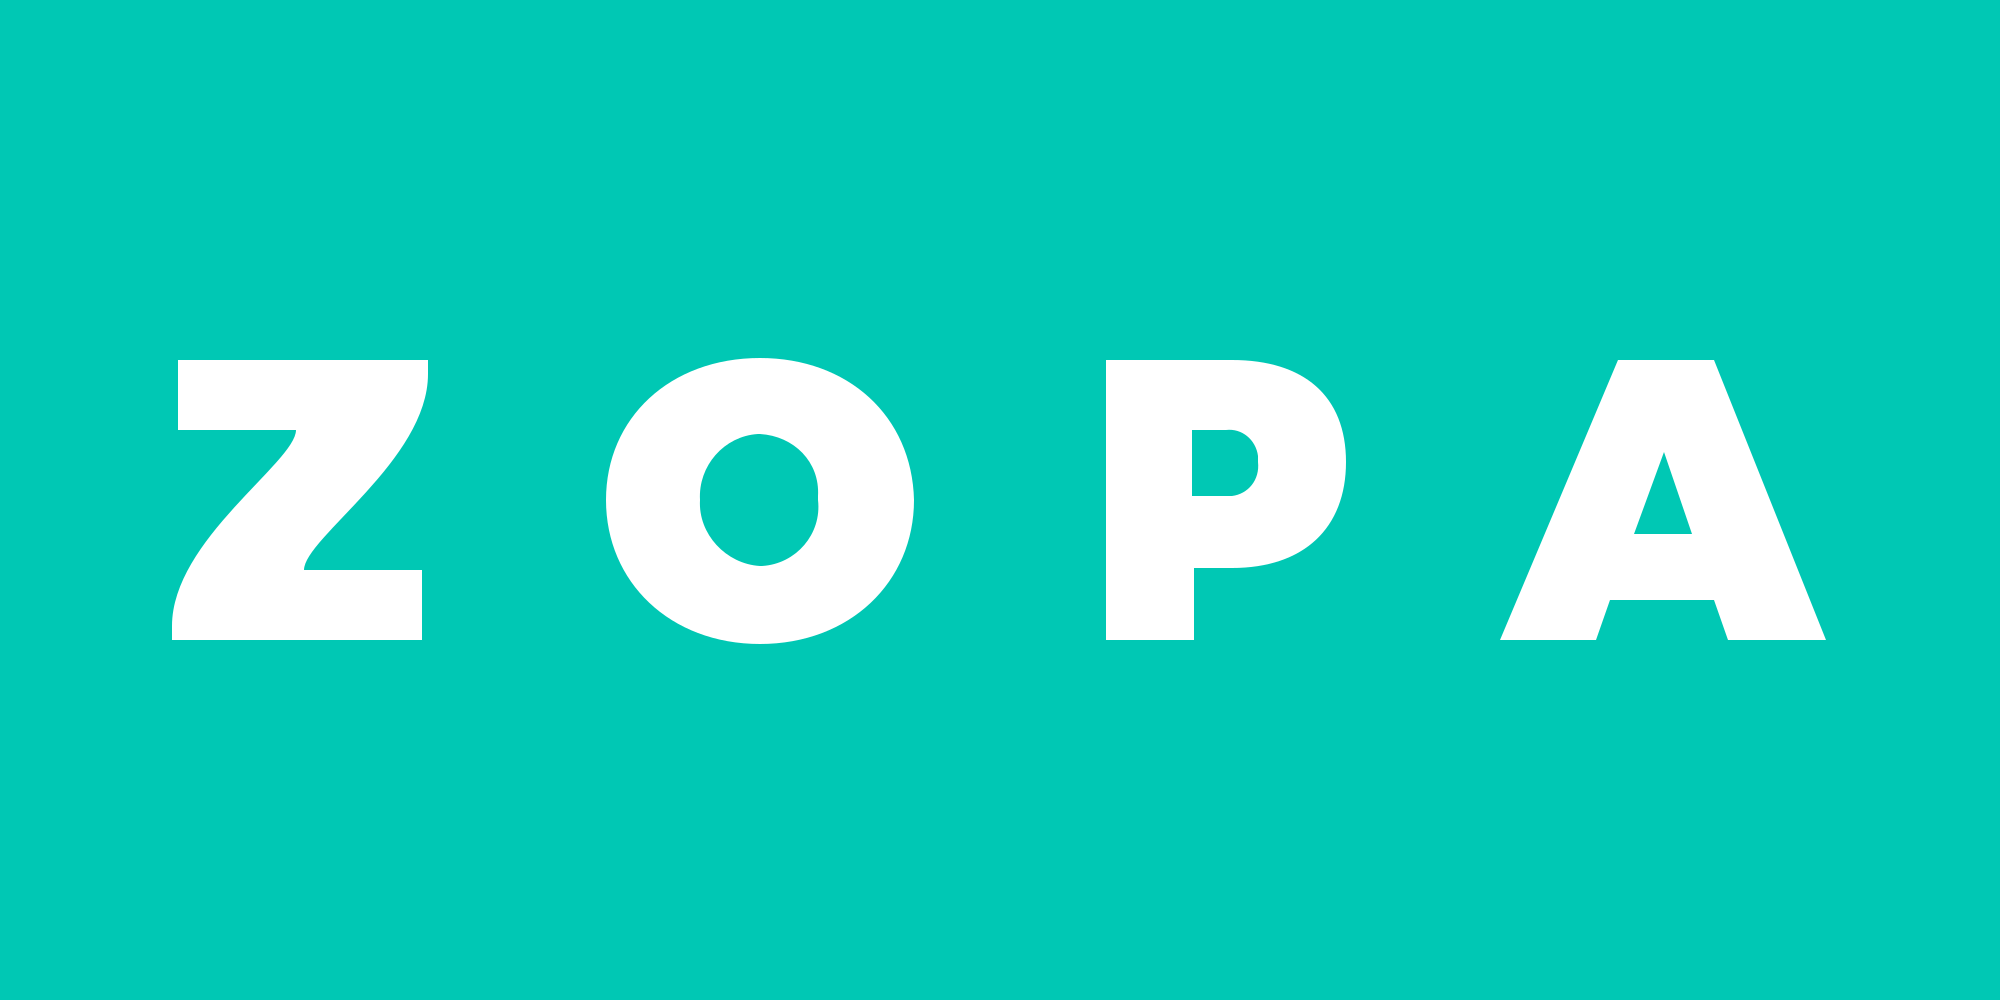 Zopa Closes £20m Internal Fundraise Following the Year 1 Success of Its Bank 